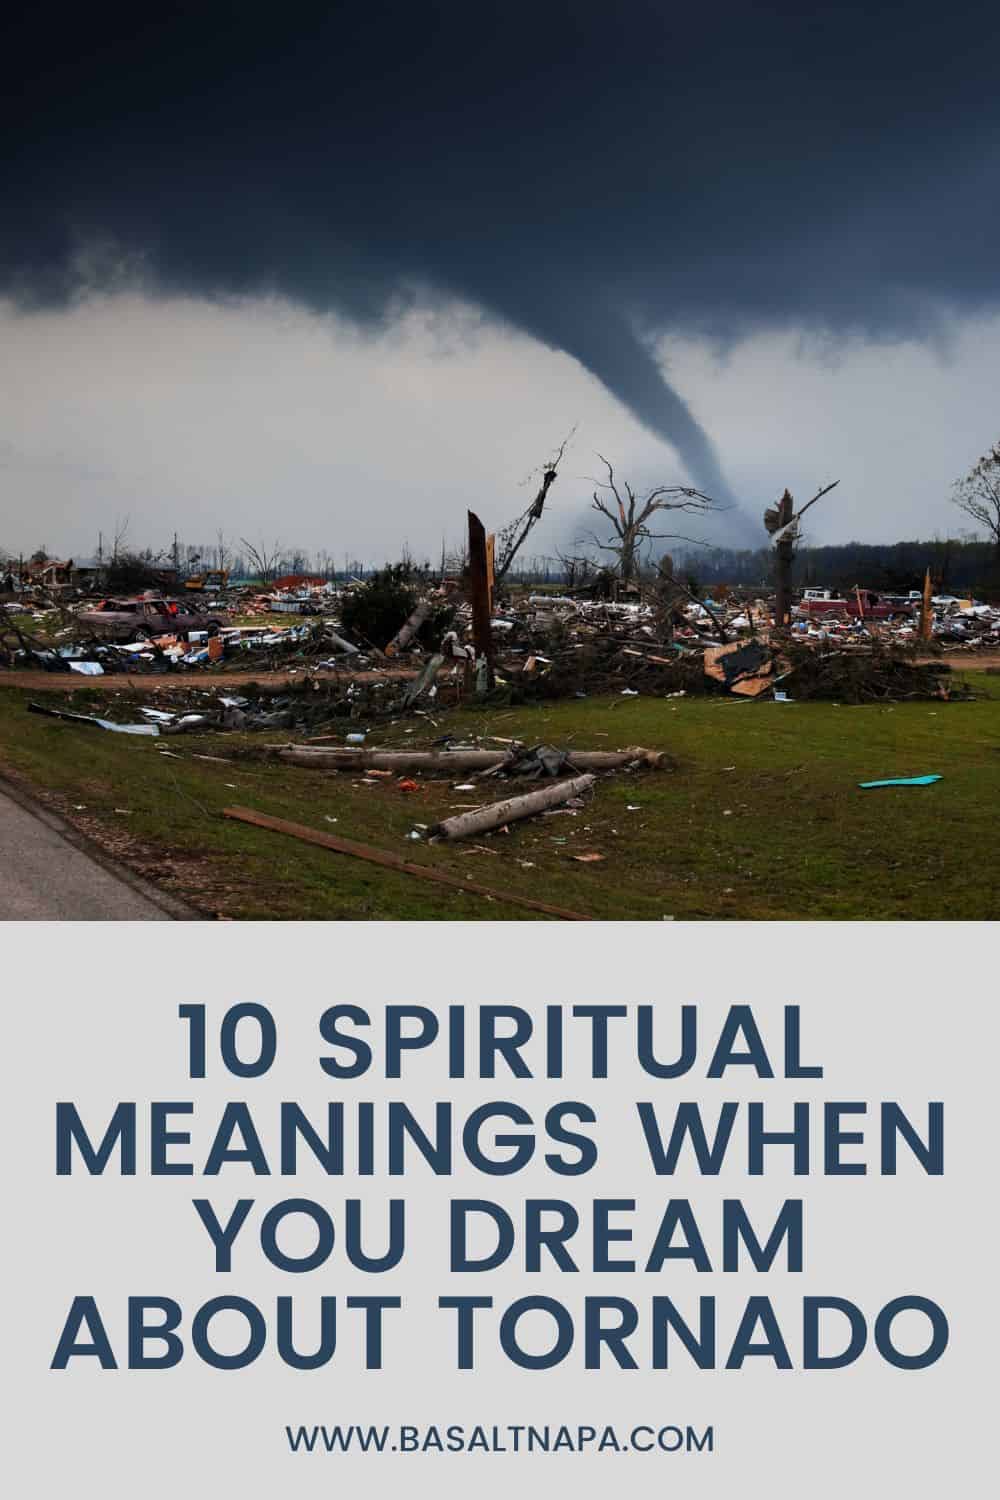 Spiritual Meanings When You Dream About Tornado